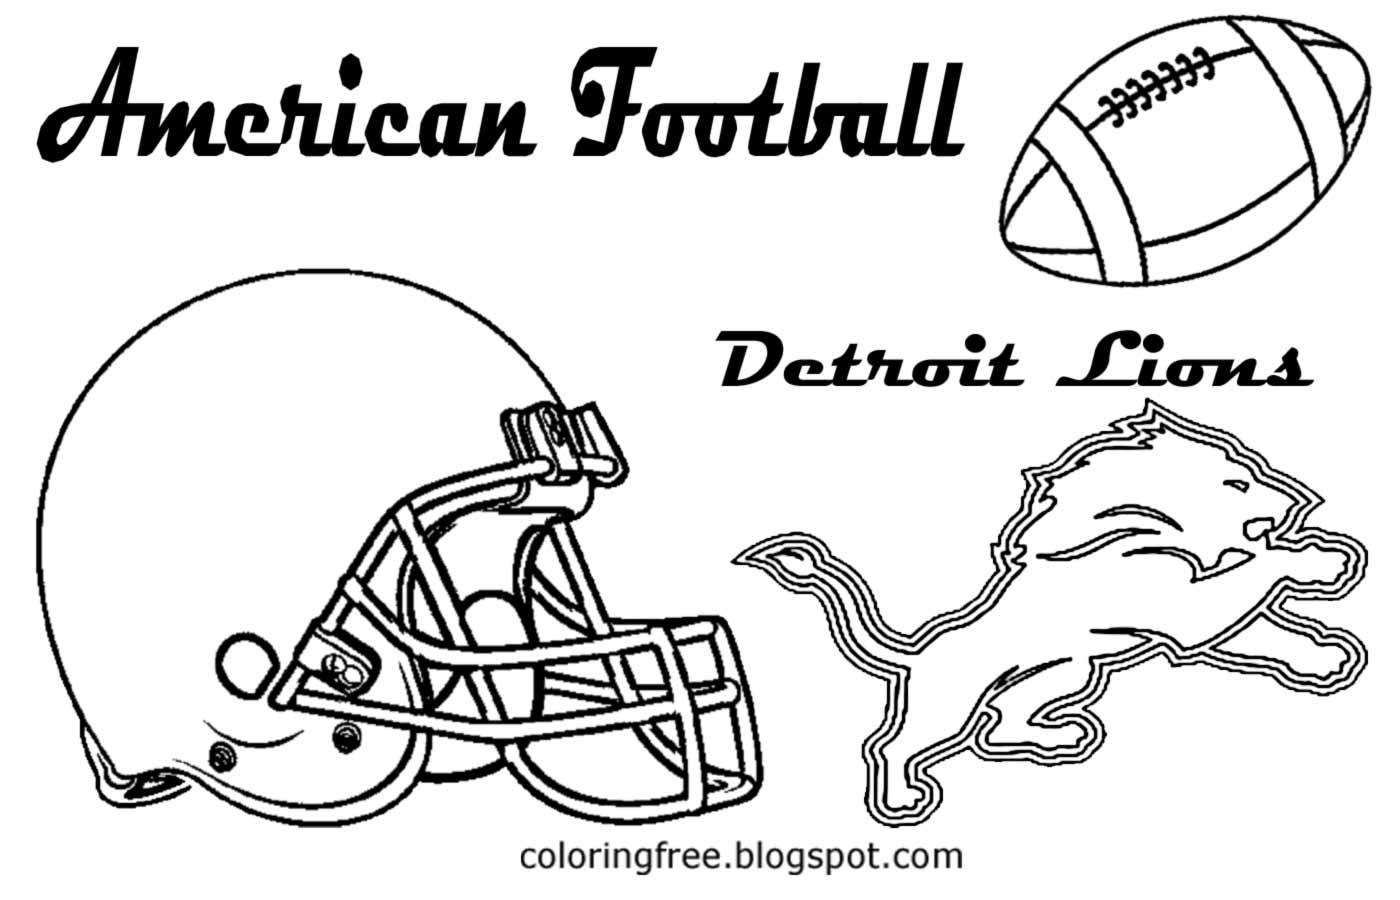 Download Calvin Johnson Football Coloring Pages Coloring Pages